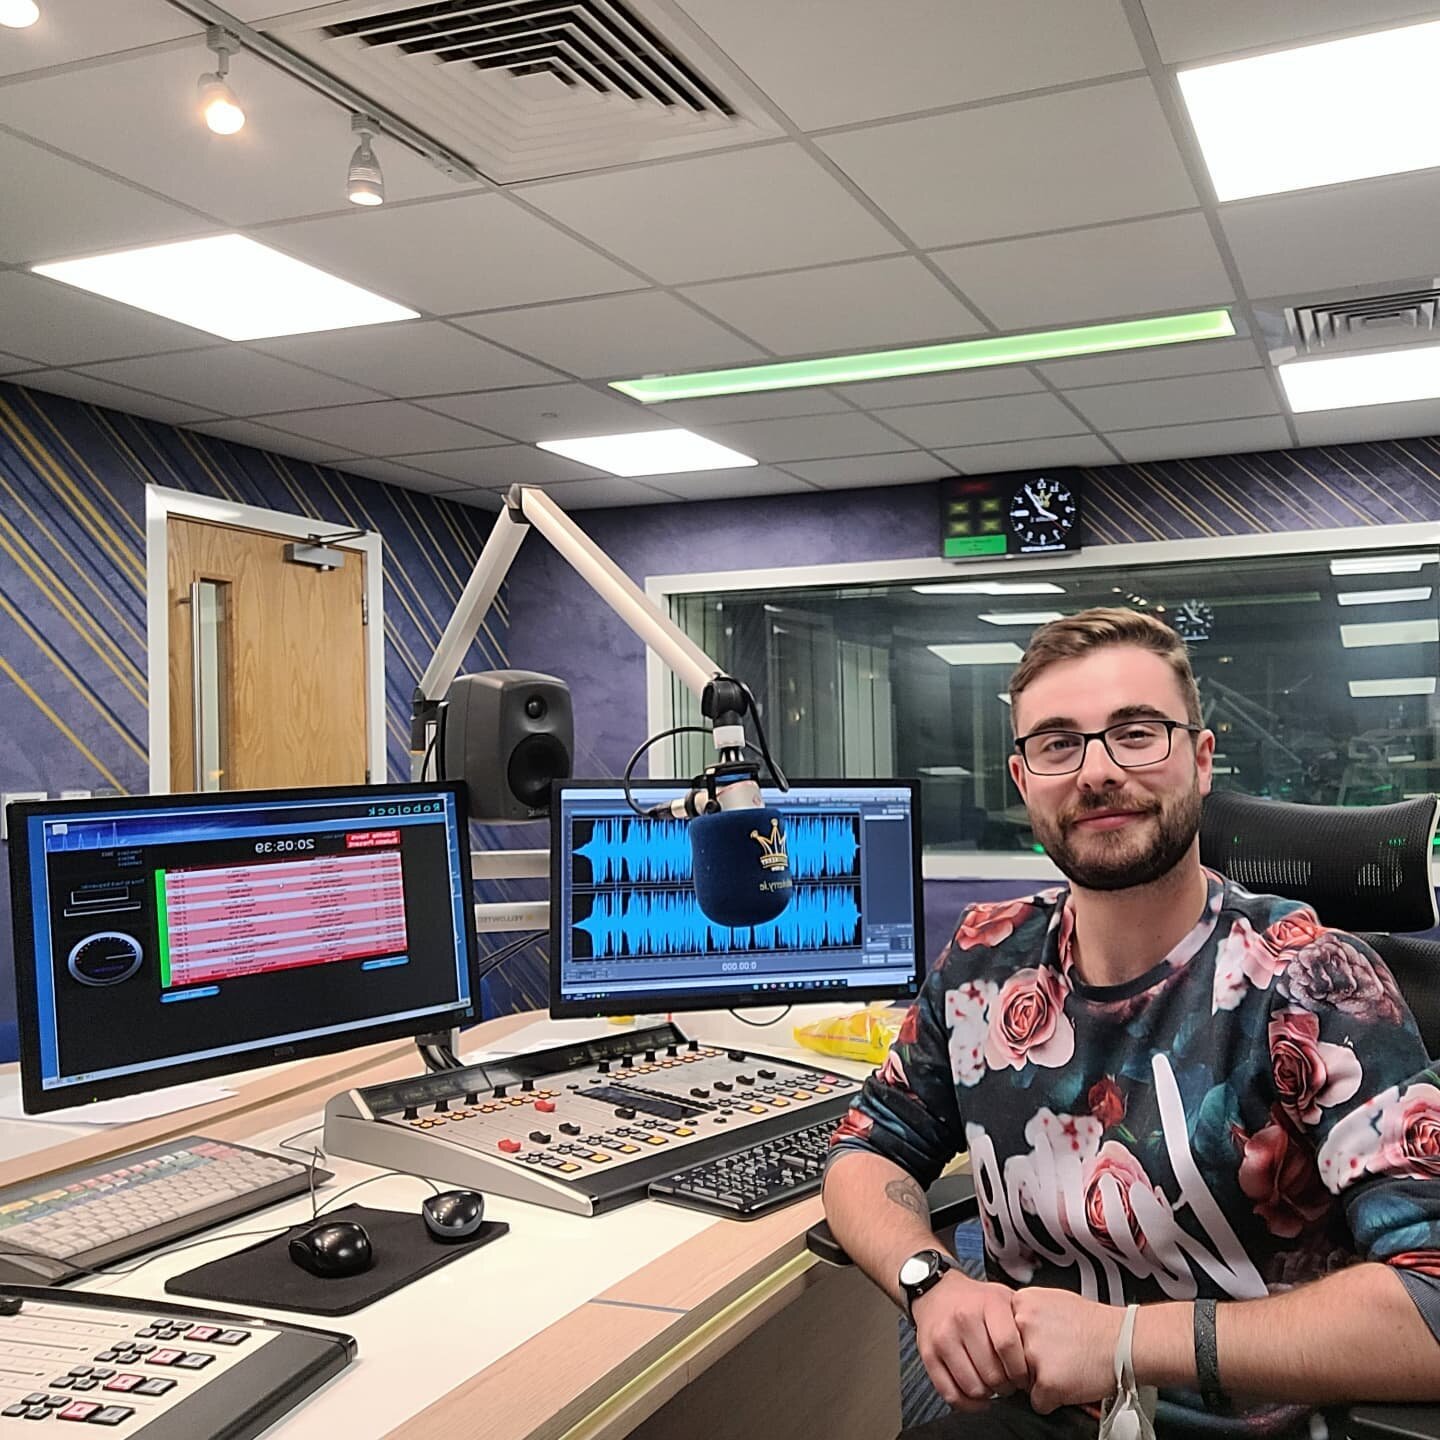 Tonight marks my last evening working in @radiokerry (for now, at least). 

The last year or so has been a fantastic experience and has solidified my love for radio. 

I can't thank everyone in Radio Kerry enough for all the help, guidance, encourage